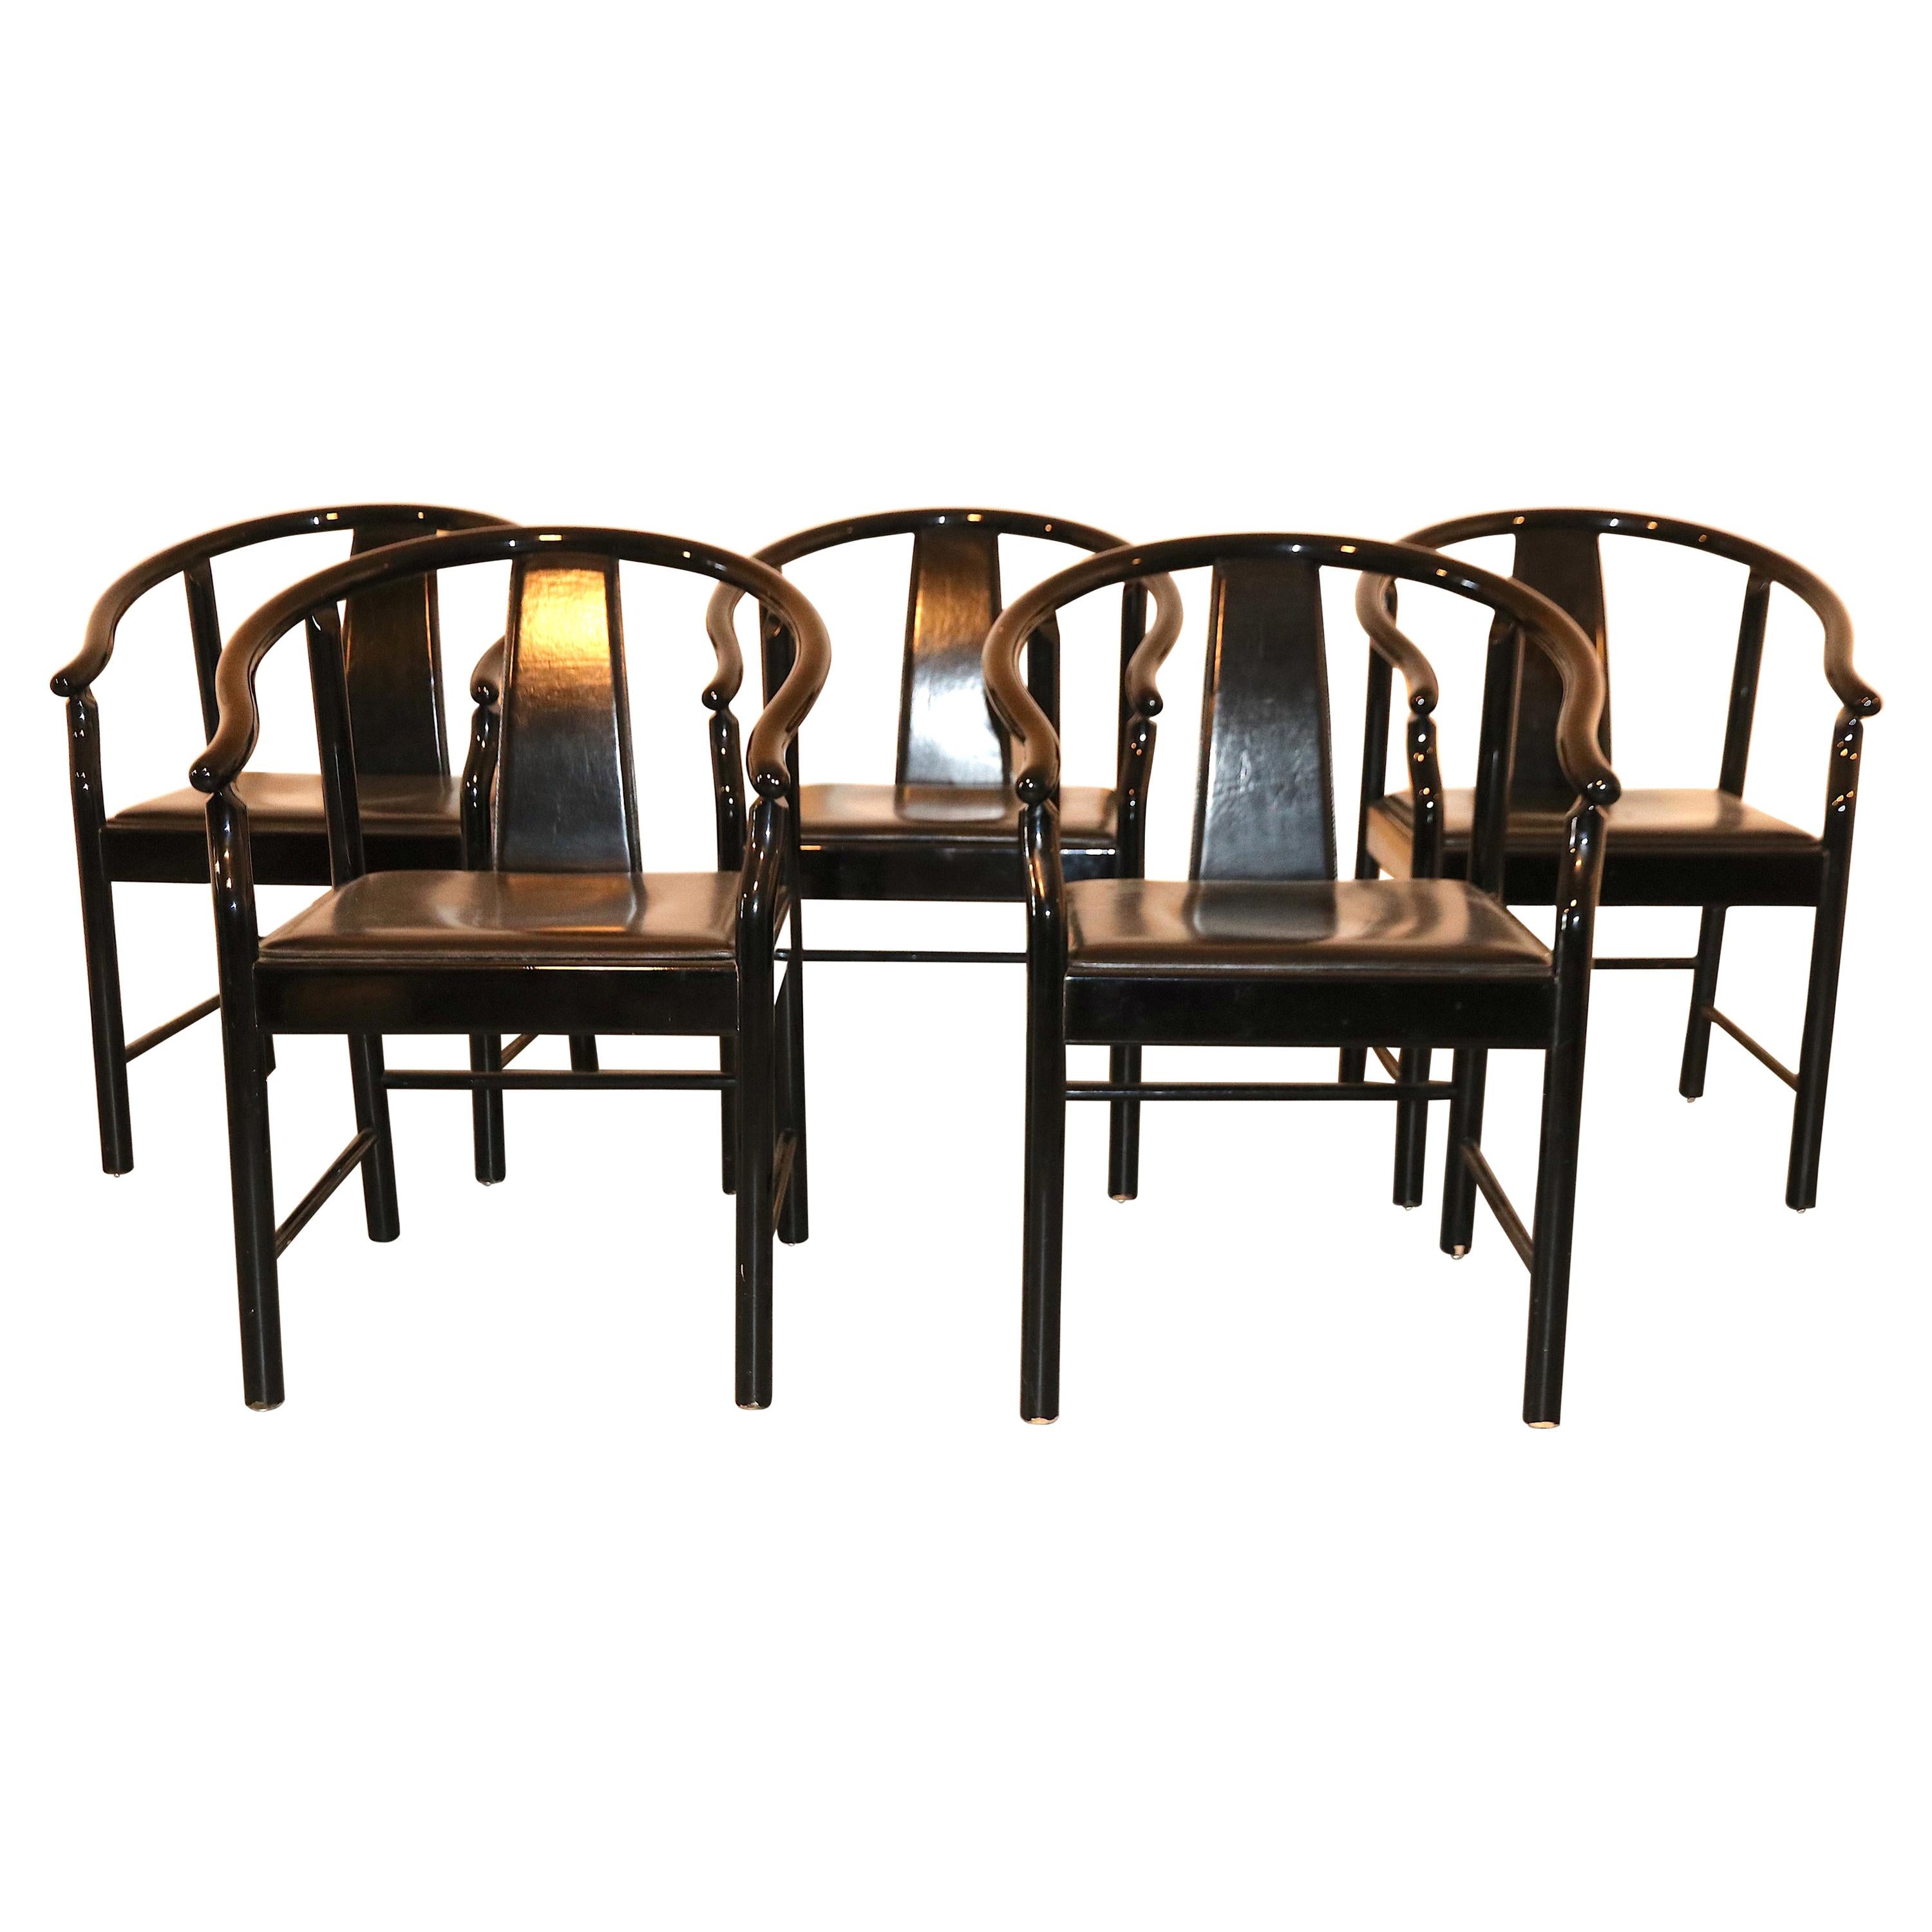 Five Black Lacquered Dining Chairs, Very Similar to the China Chair For Sale